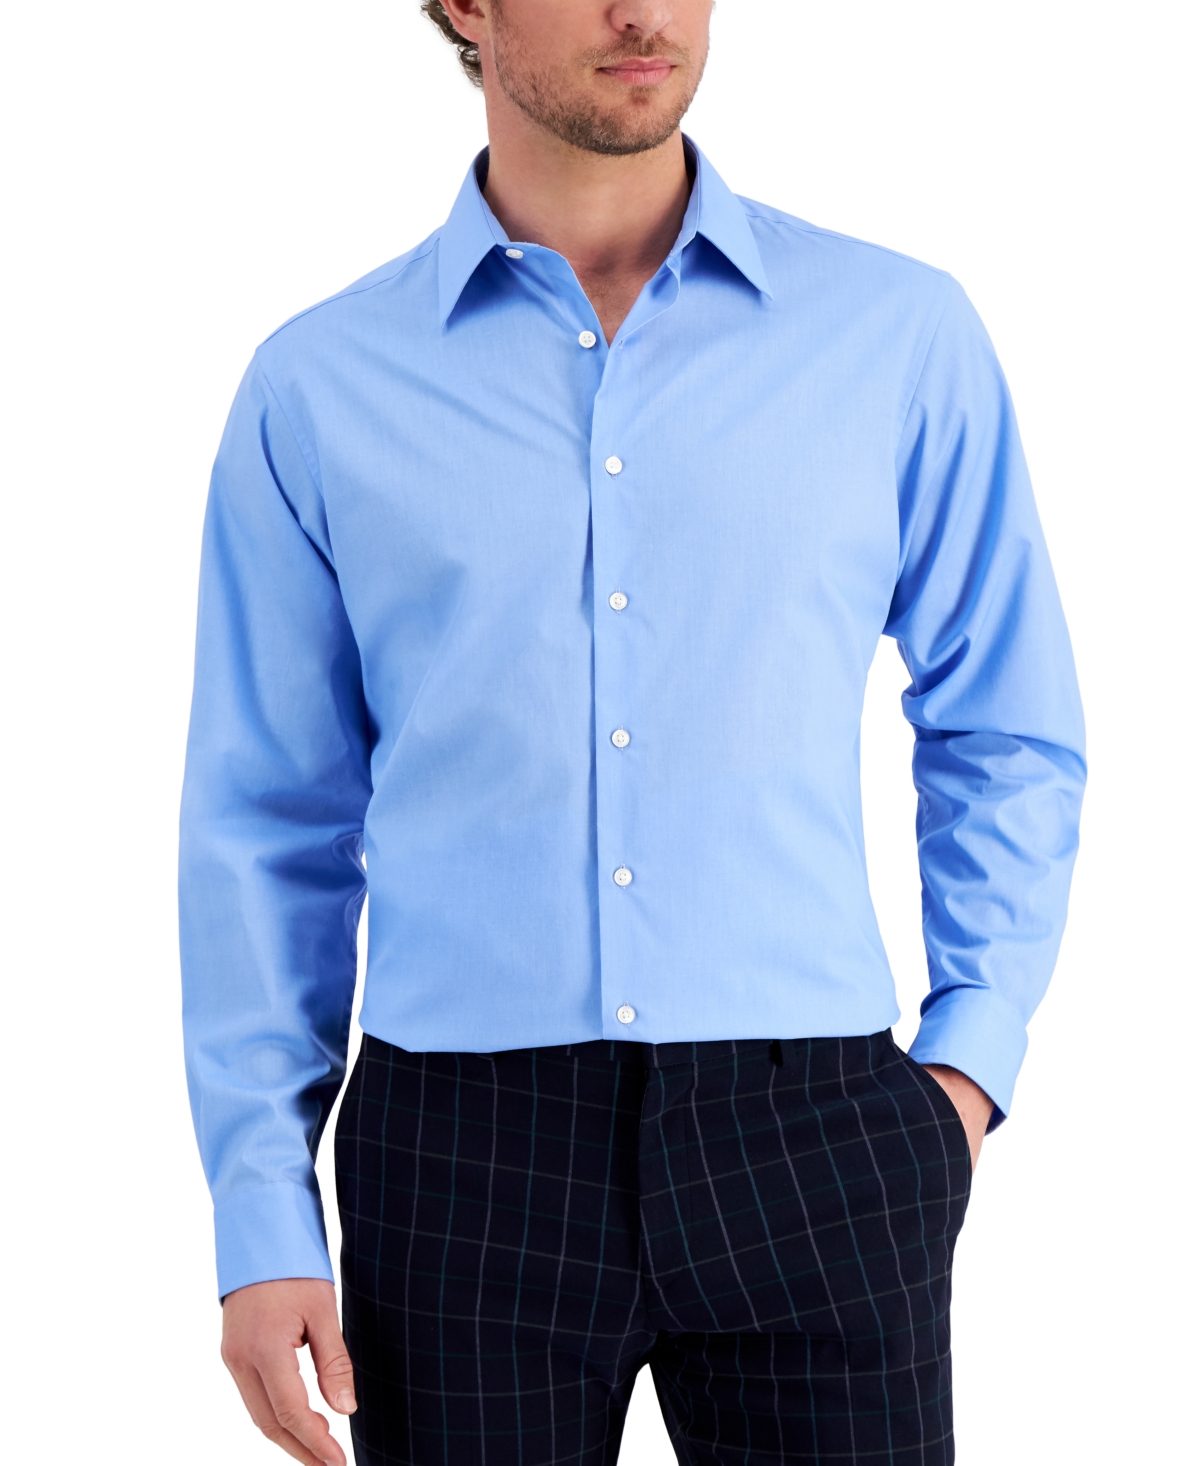 Men's Regular Fit Solid Dress Shirt, Created for Macy's - Yacht Blue